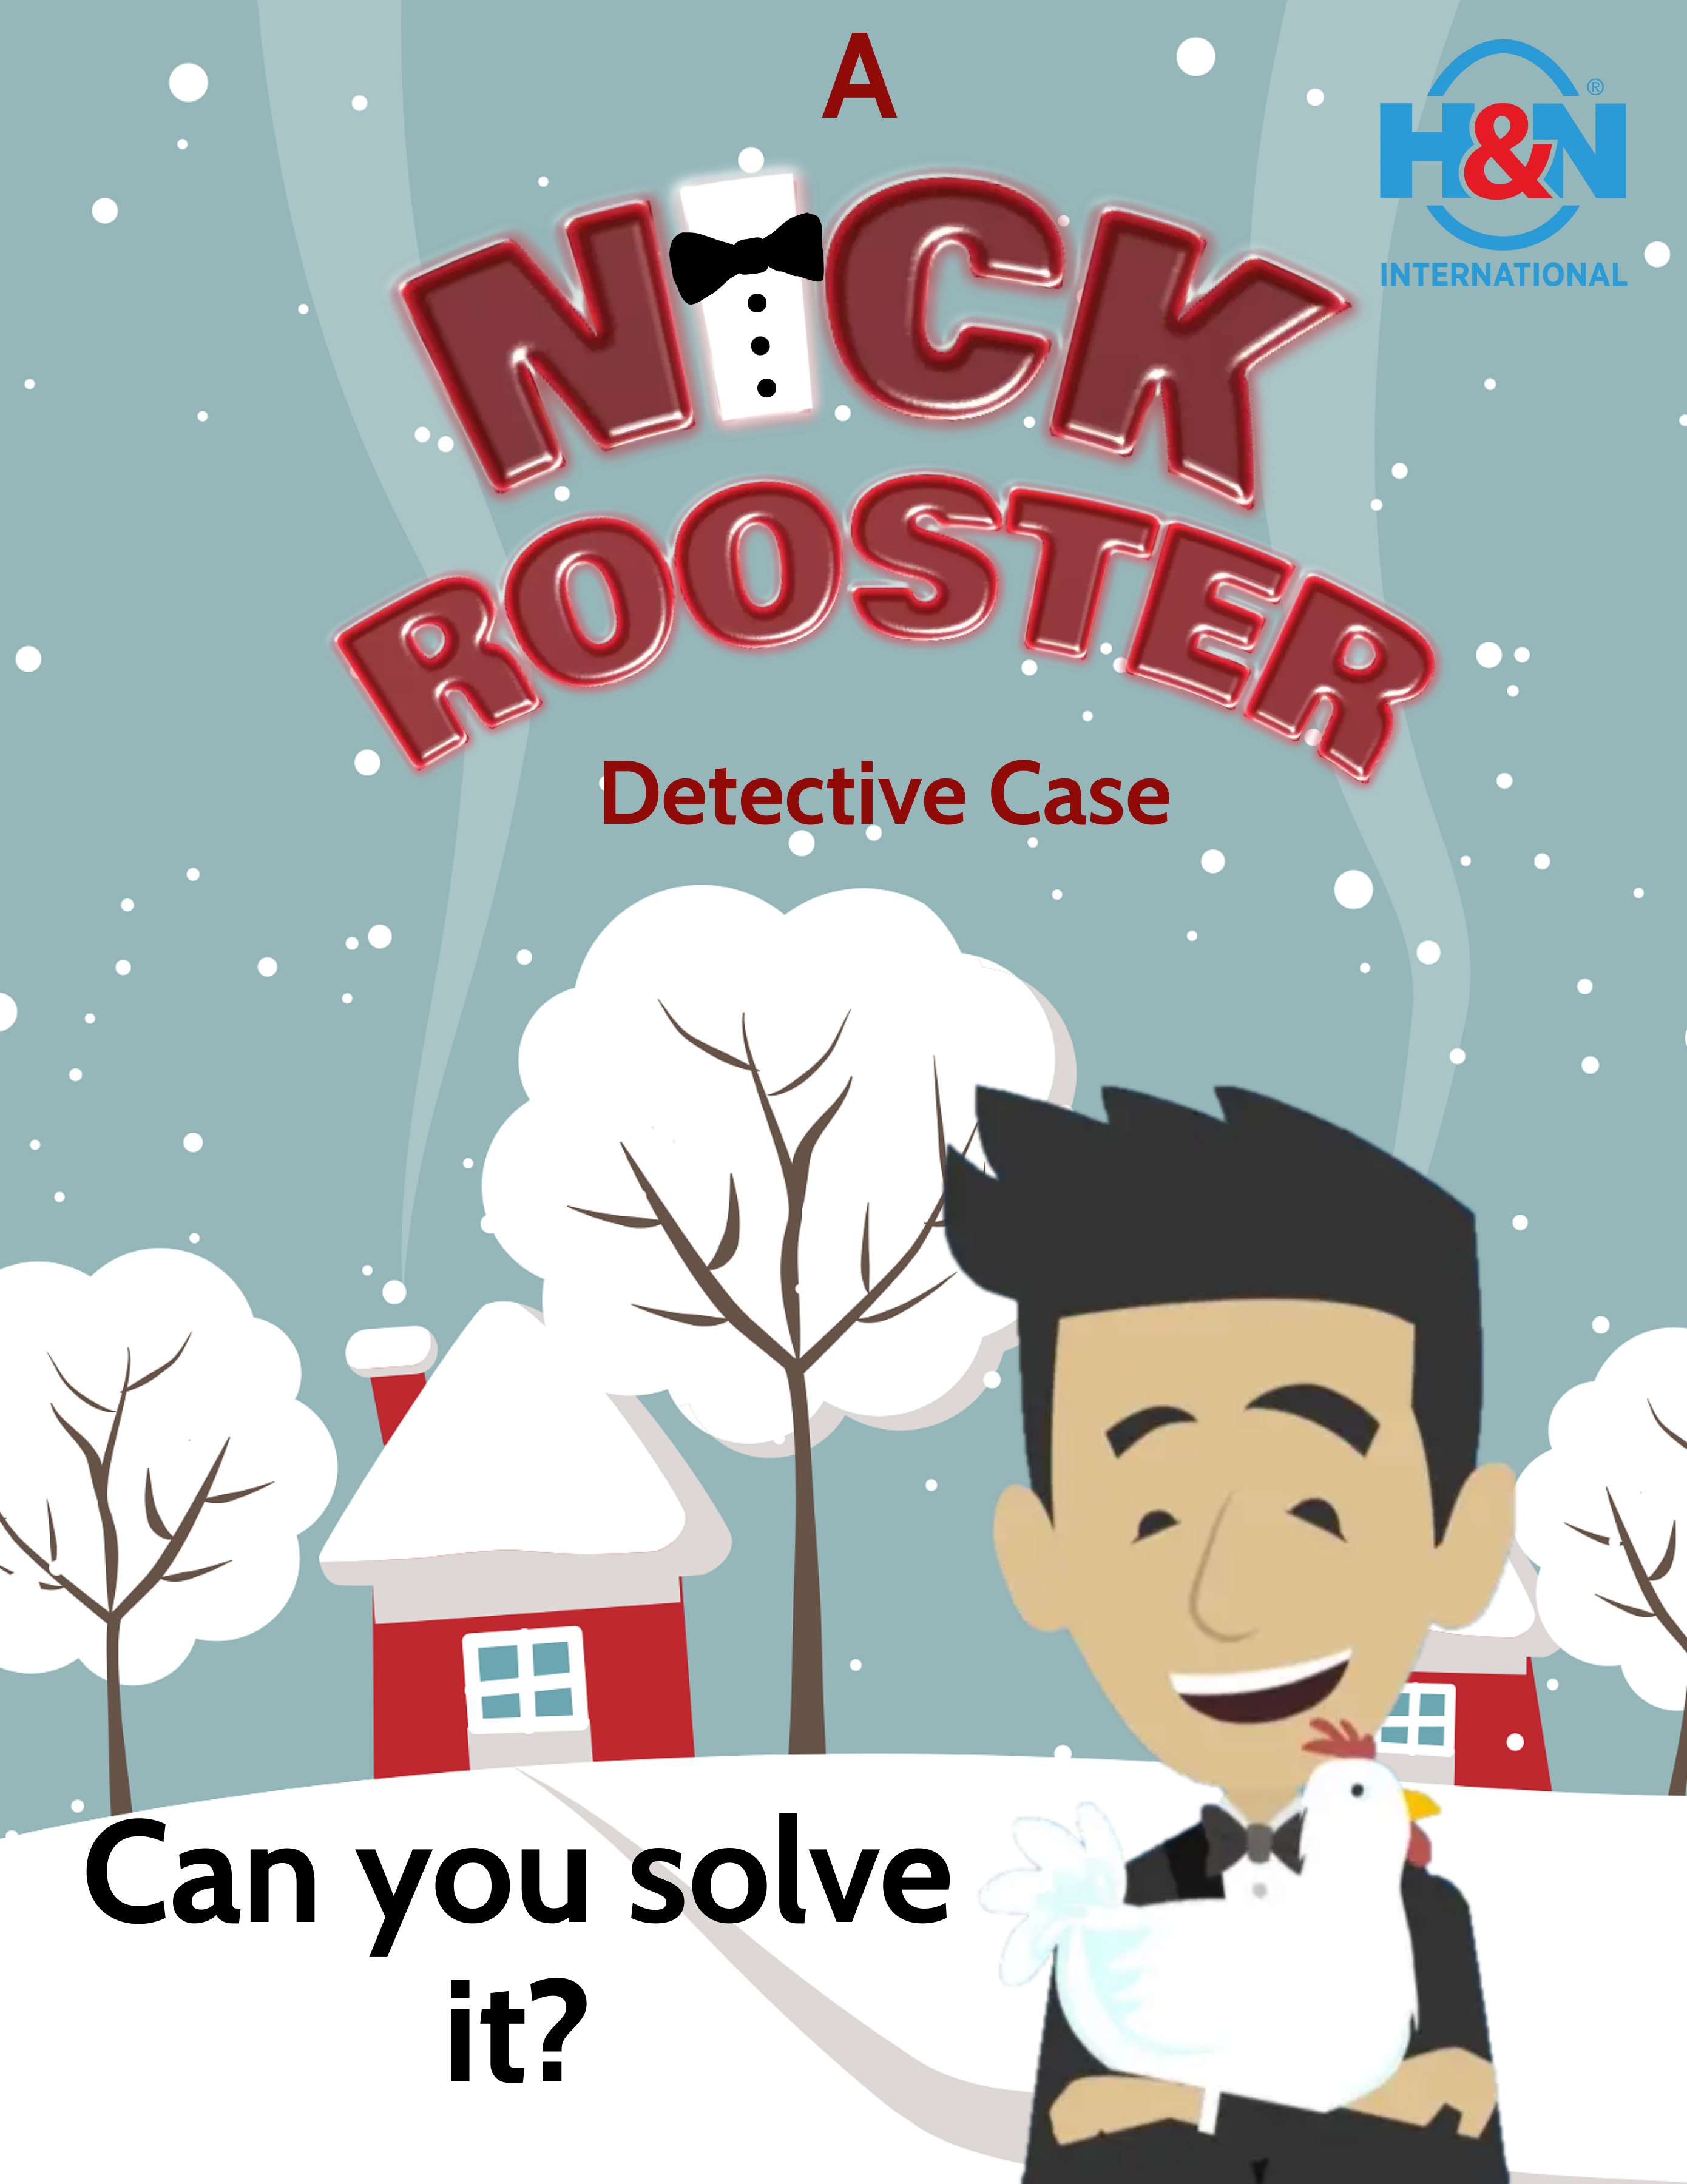 Nick Rooster case no. 15